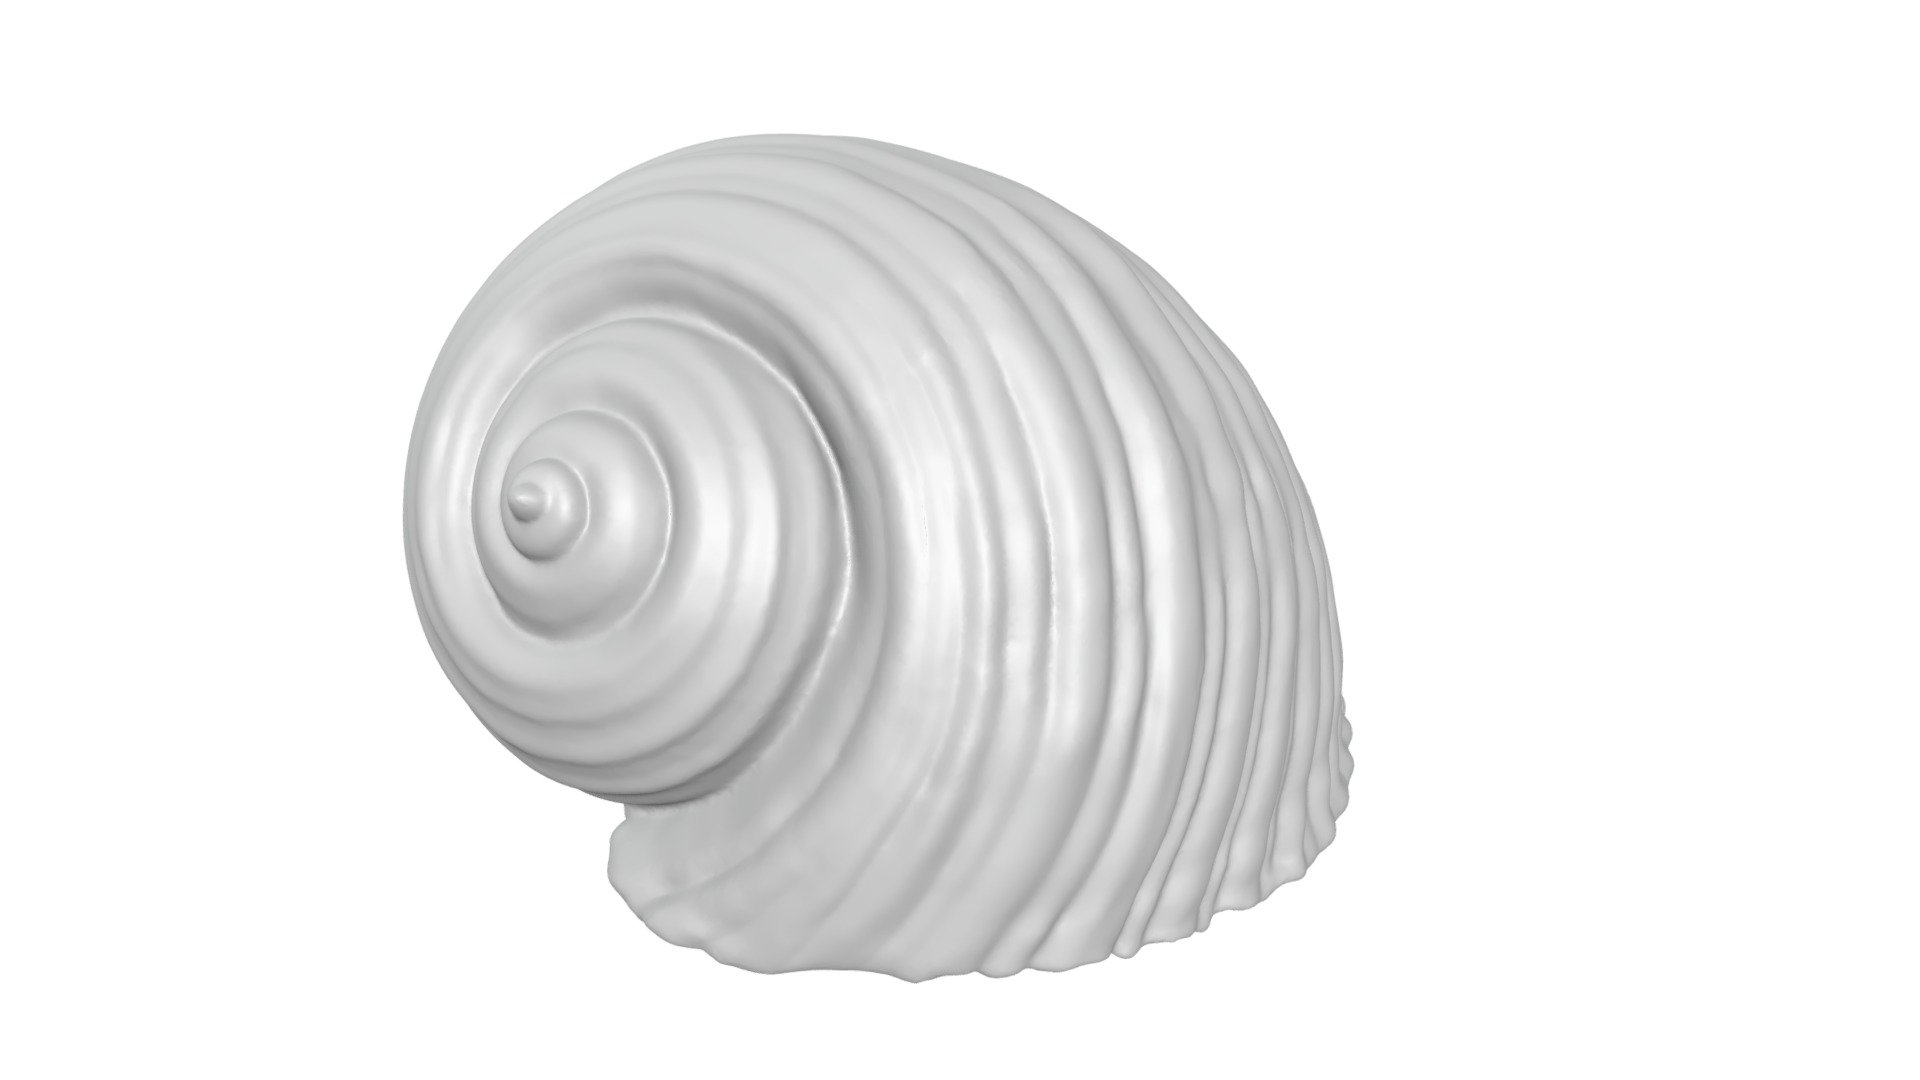 Shell - seashell - conch - sea 

STL Model for 3D Printing.

Contact me for any question.

Came to see my other work.

If you get this model, I encourage you to give me feedback, just send me a message on instagram, I’d very happy to help or hear your feedback and pictures :)

For other custom products, please contact me, I would be glad to help you, I accept non or exclusive commissions.

If you like my art, please support me by purchasing my models, or following me on social media:

Instagram: https://www.instagram.com/animaartistspieces/

TikTok: https://www.tiktok.com/@animaartistspieces?lang=it

Facebook: https://www.facebook.com/profile.php?id=100087530776989

WEBSITE: https://www.animacampania.it/site/

Linktree: https://linktr.ee/animaartistspieces - Shell - seashell - conch - Buy Royalty Free 3D model by Anima artist's pieces (@animaartistspieces) 3d model